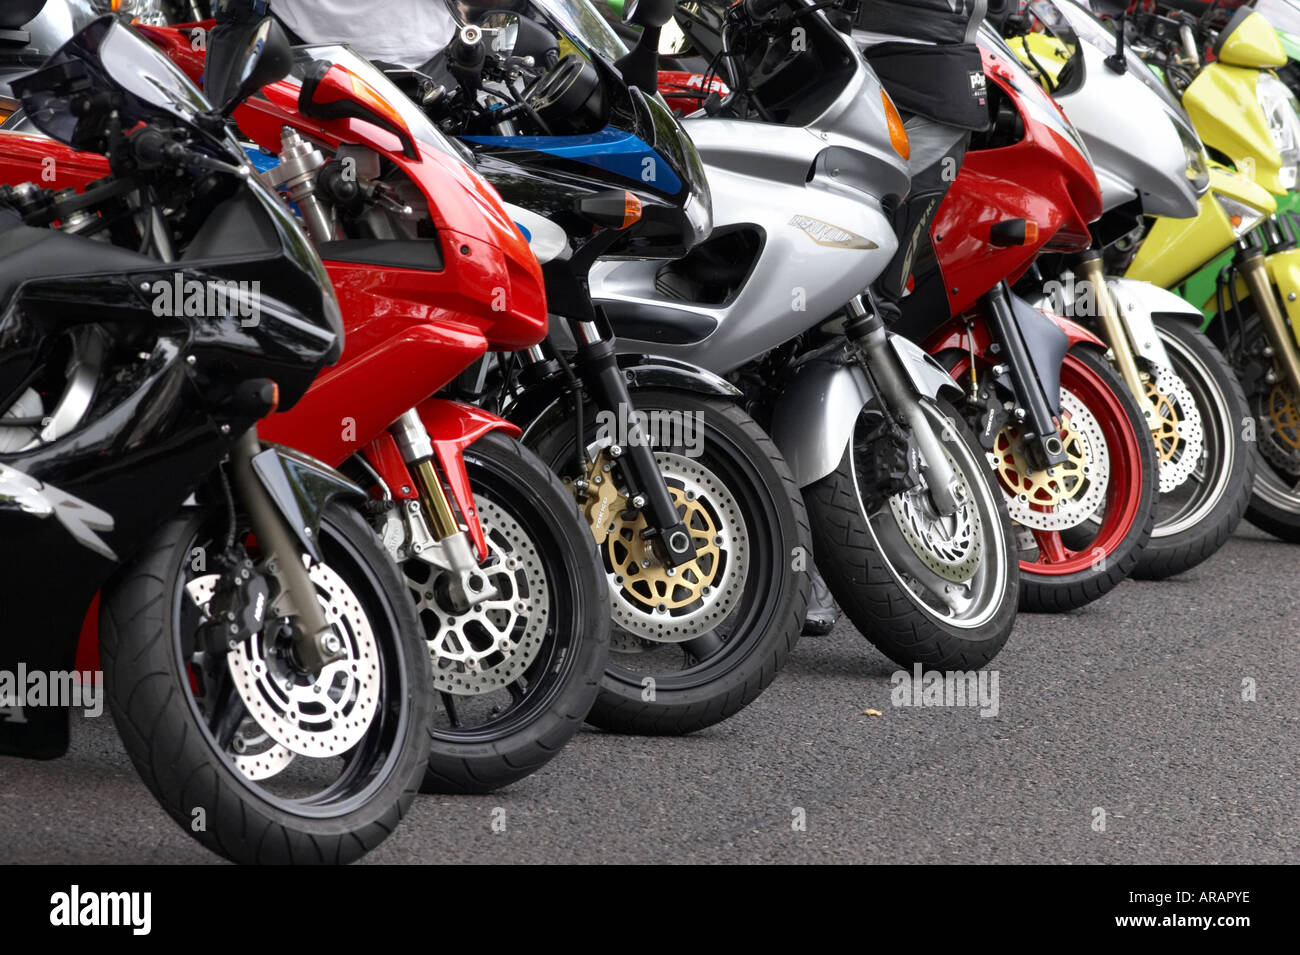 Row of parked motorbikes in London UK Stock Photo